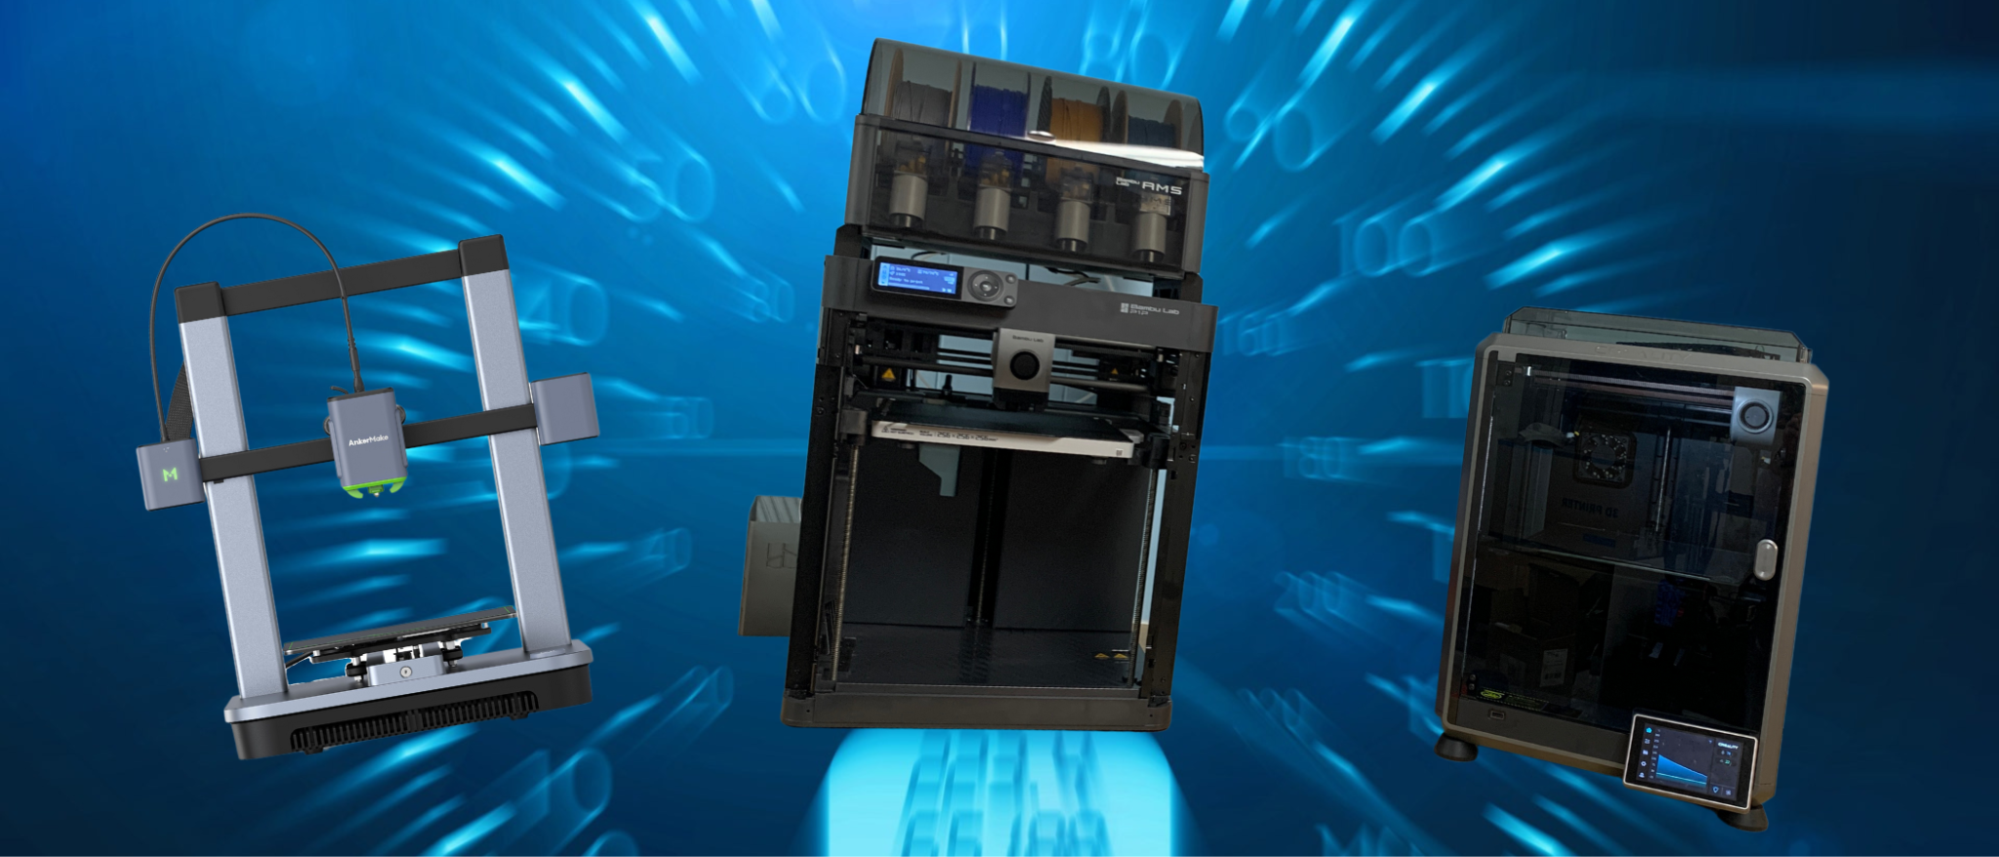 Fastest 3D Printers Benchmarked: Top Printers Ranked By Output Time